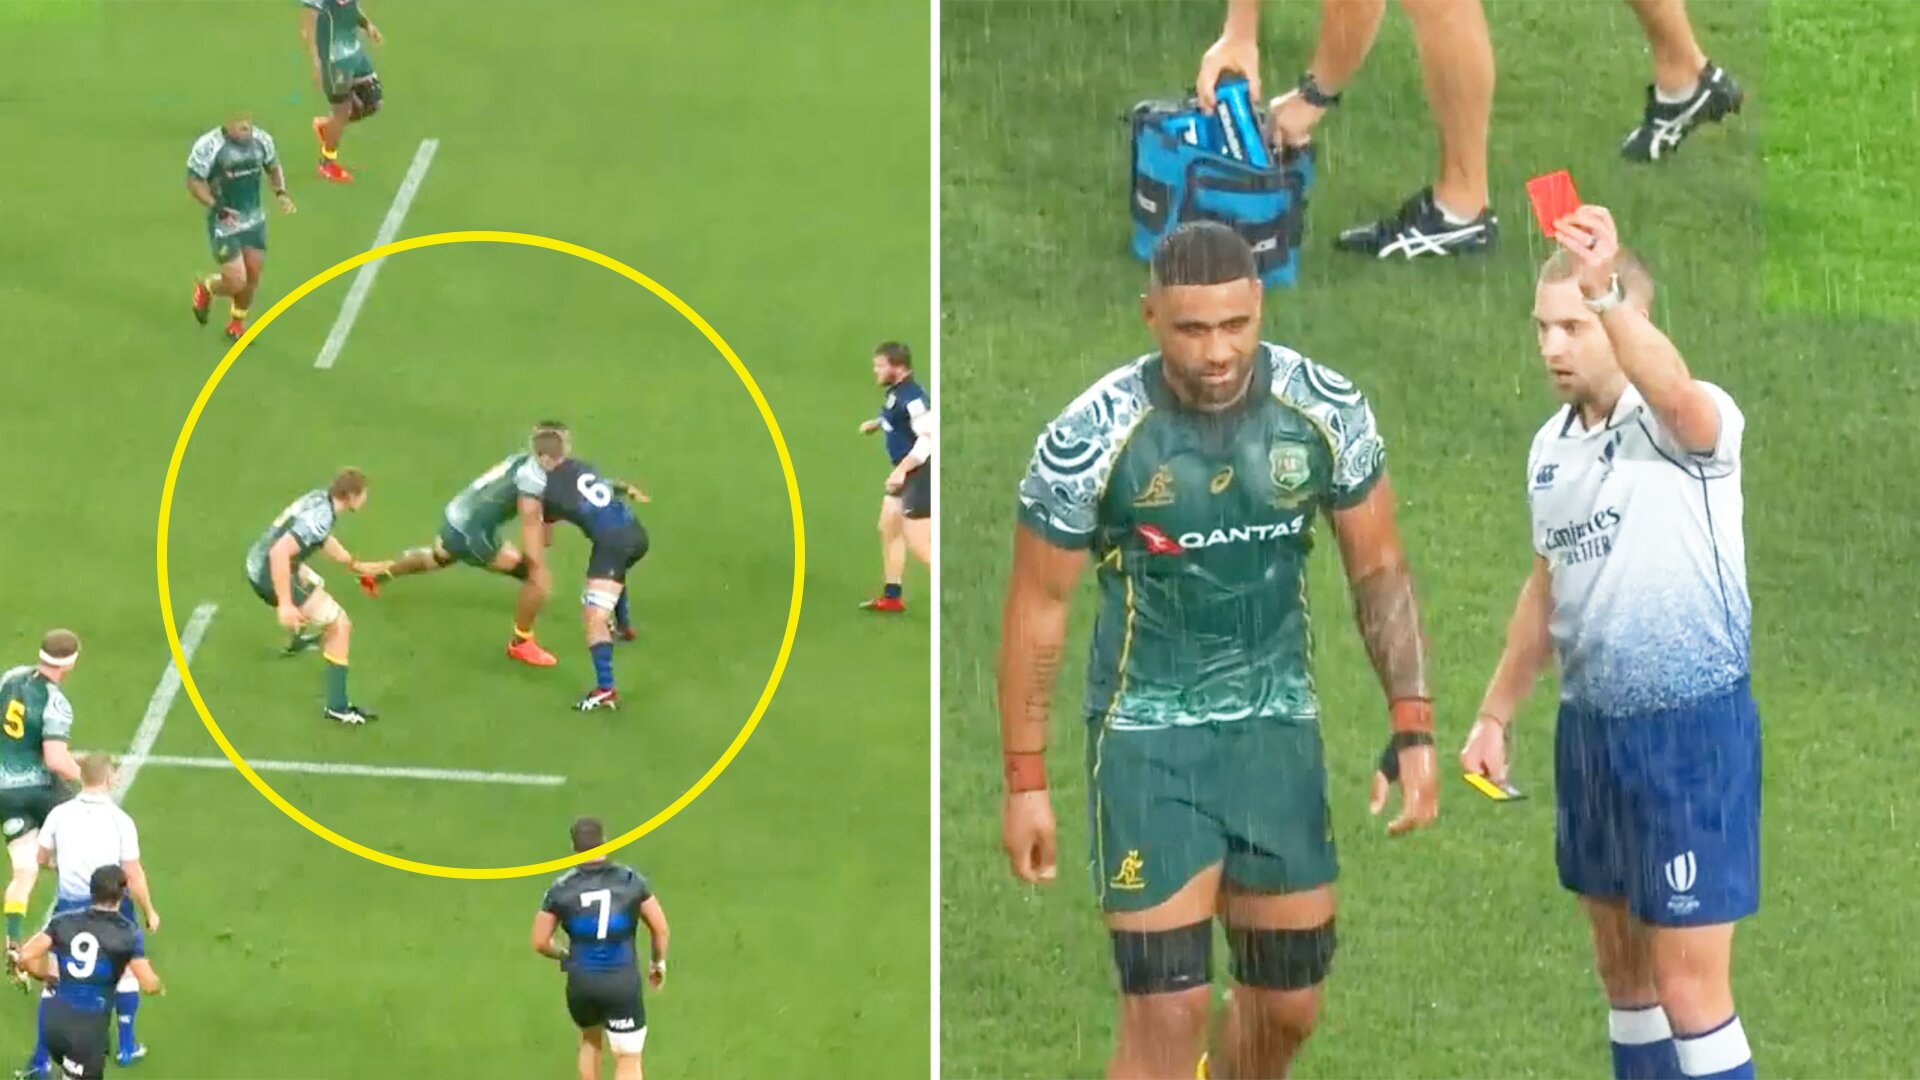 Revolting tackle almost decapitates Pumas player in Tri-Nations shocker